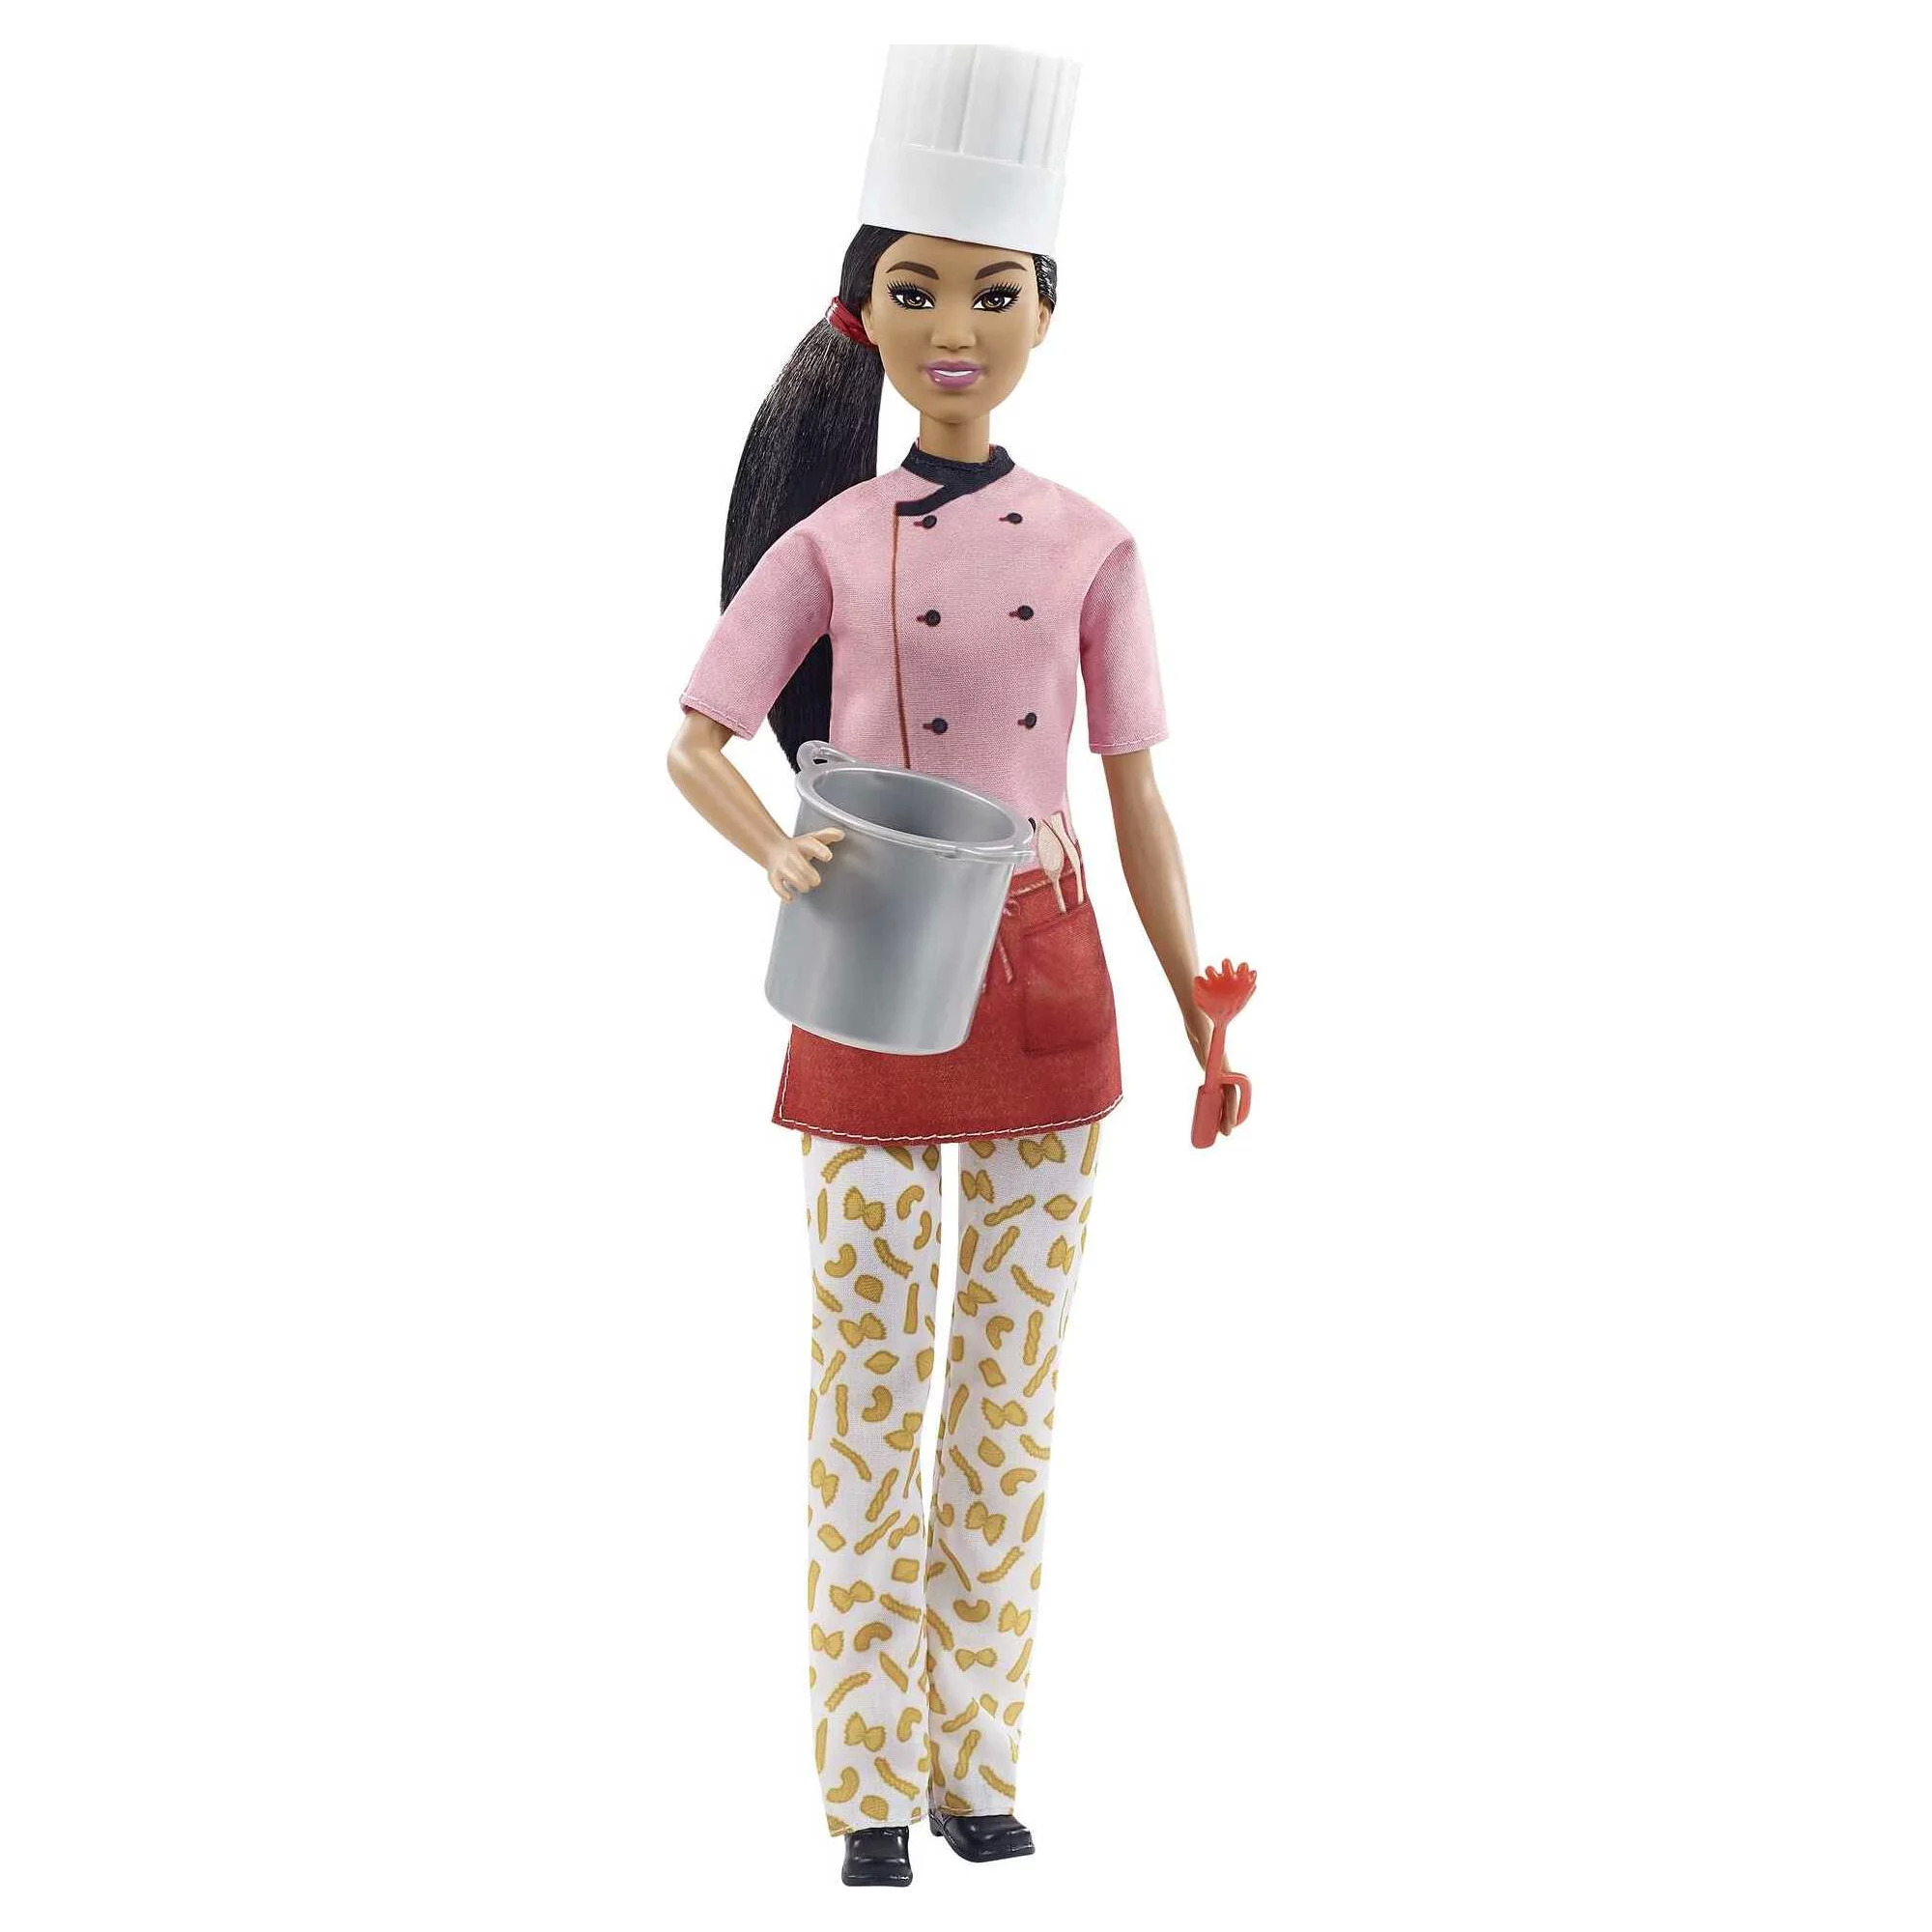 12" Barbie Career Pasta Chef Doll w/ Accessories (Brunette) $3.97 + Free Store Pickup at Walmart or Free Shipping w/ Walmart+ or on $35+